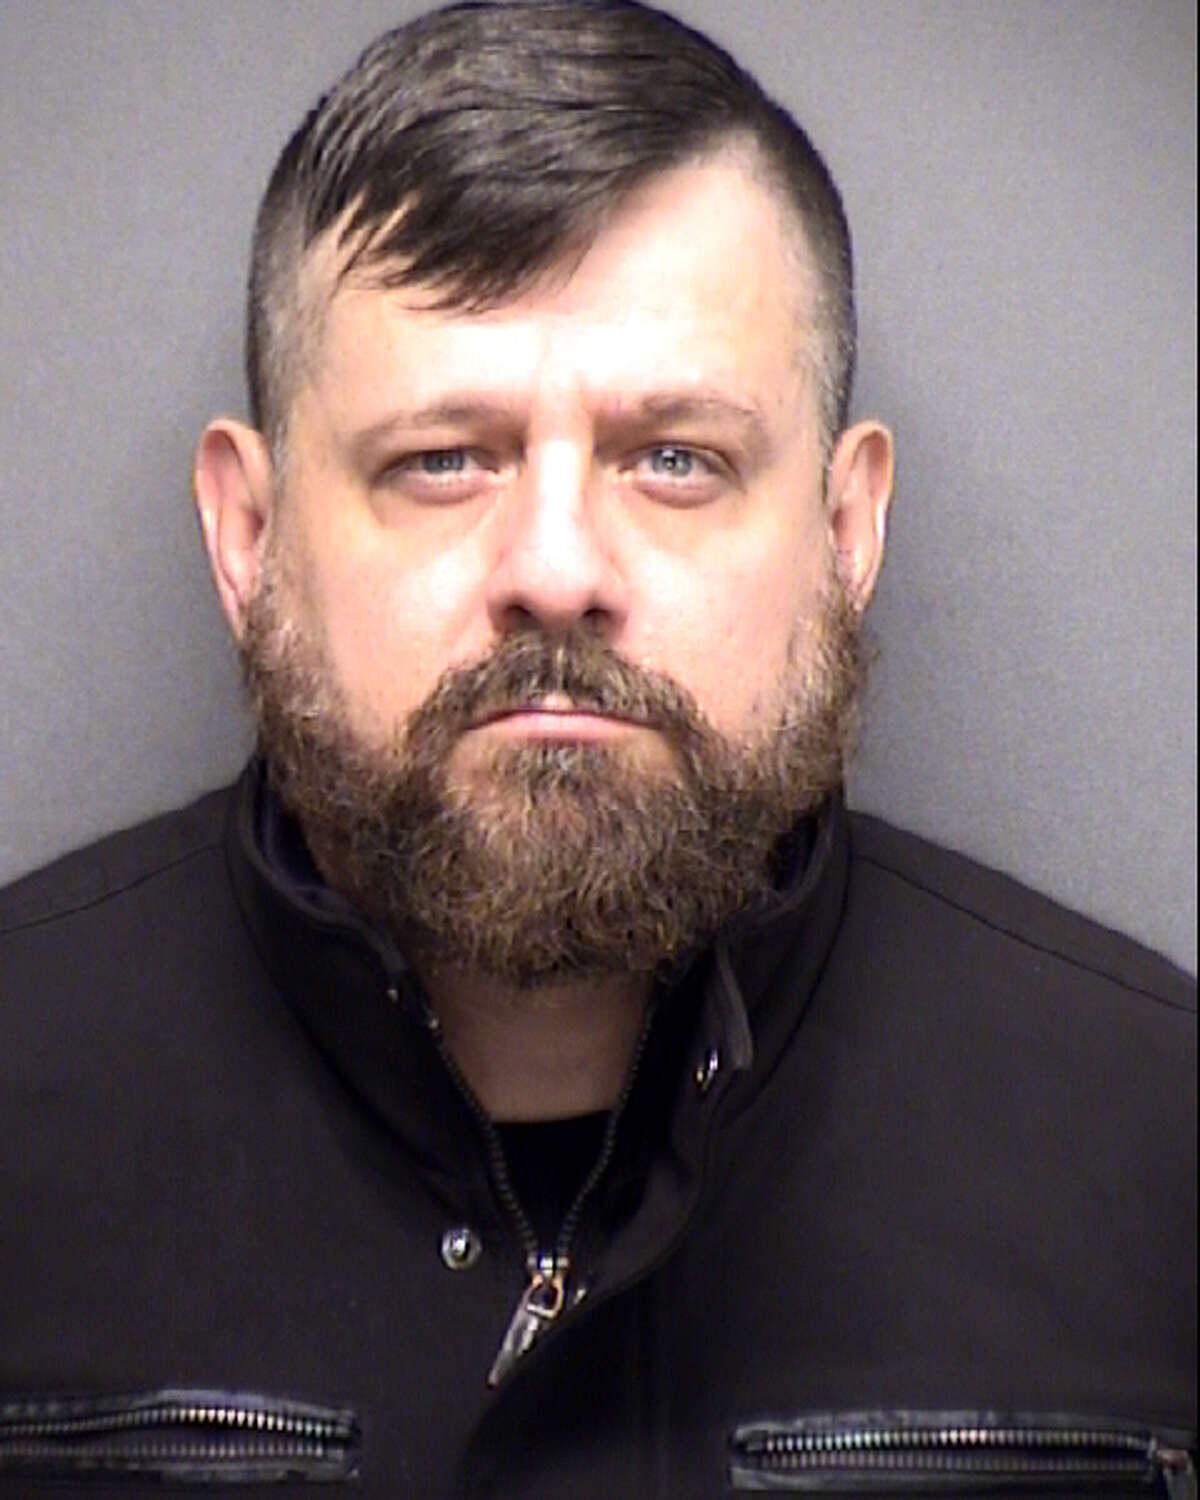 John Allen Liberatore was indicted with sexual assault of a child on August 21, 2019.